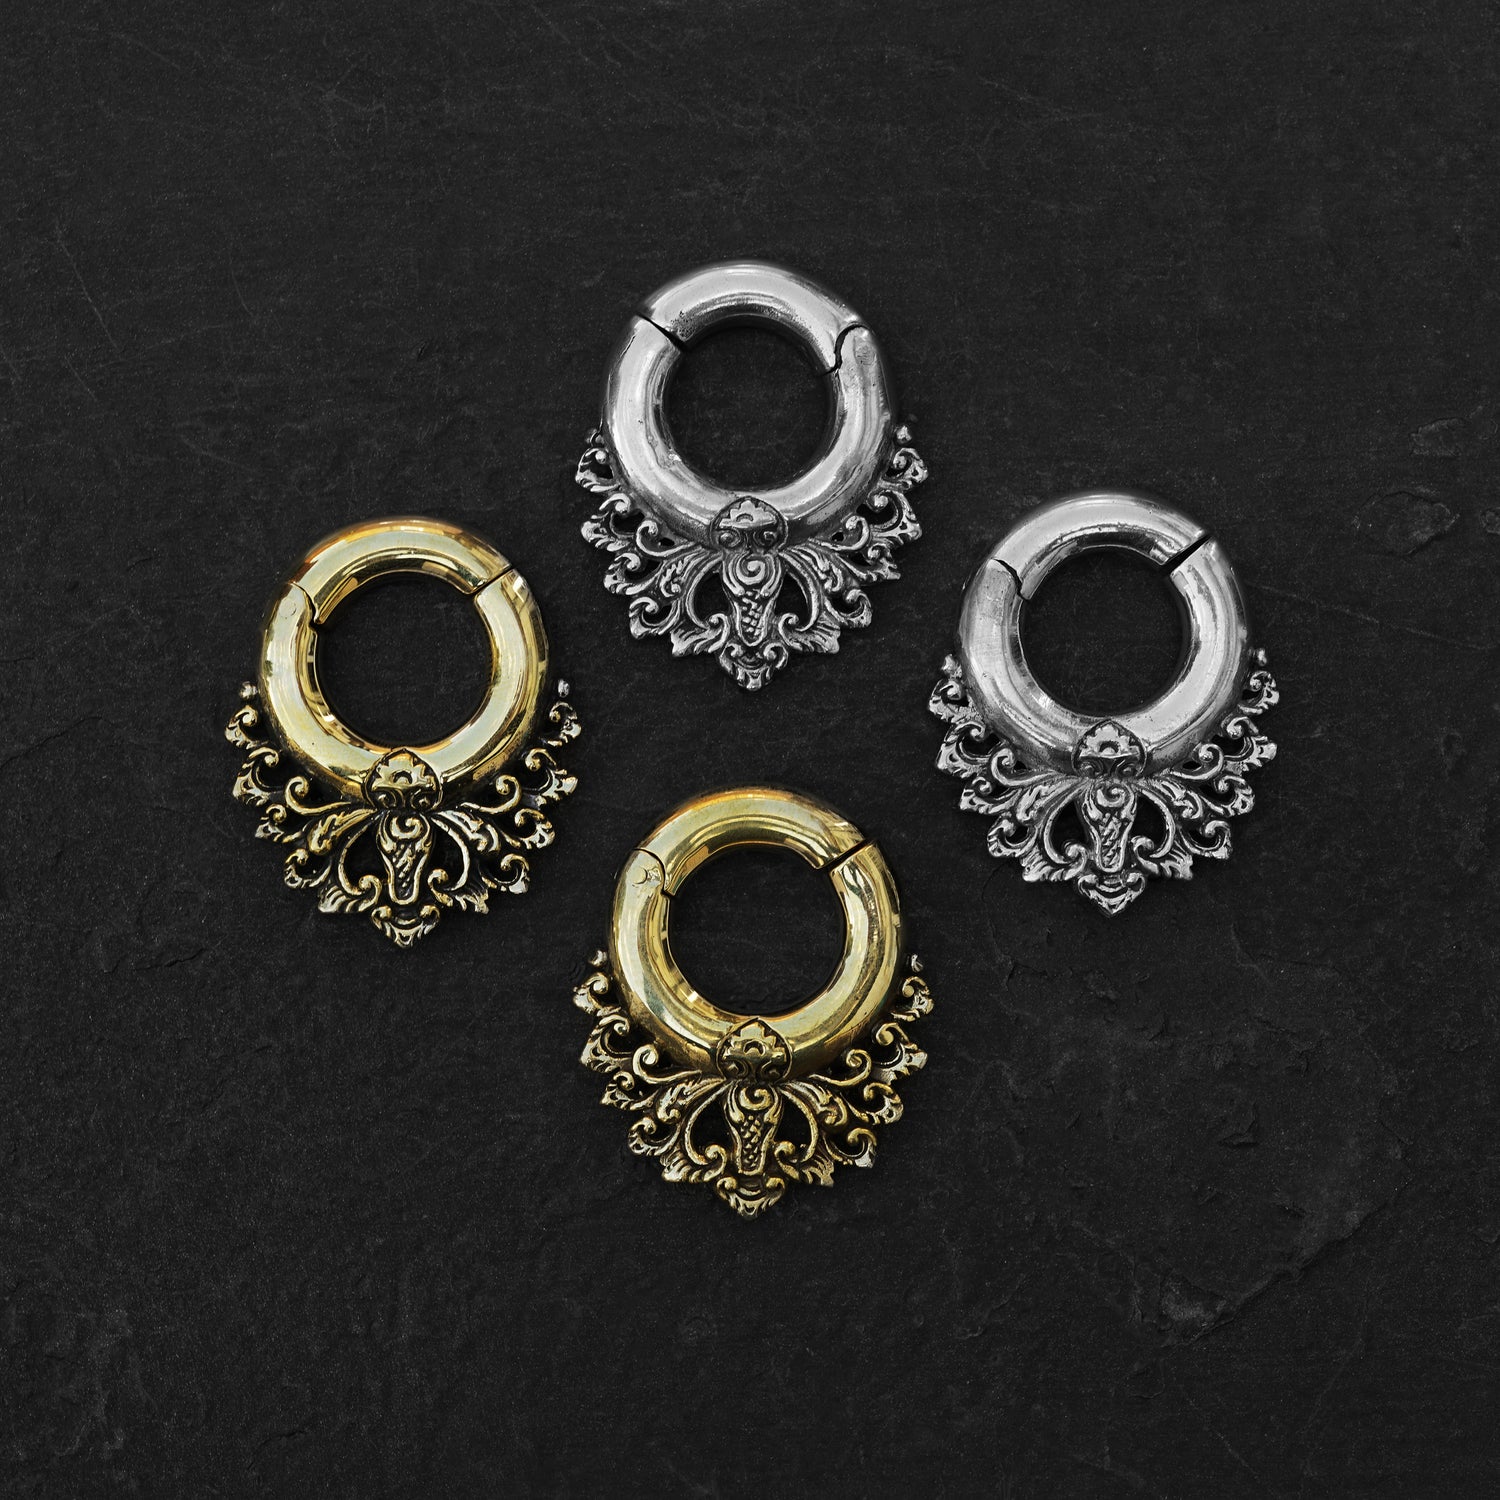 pairs of silver and gold brass ear hangers hoops with floral victorian design frontal view